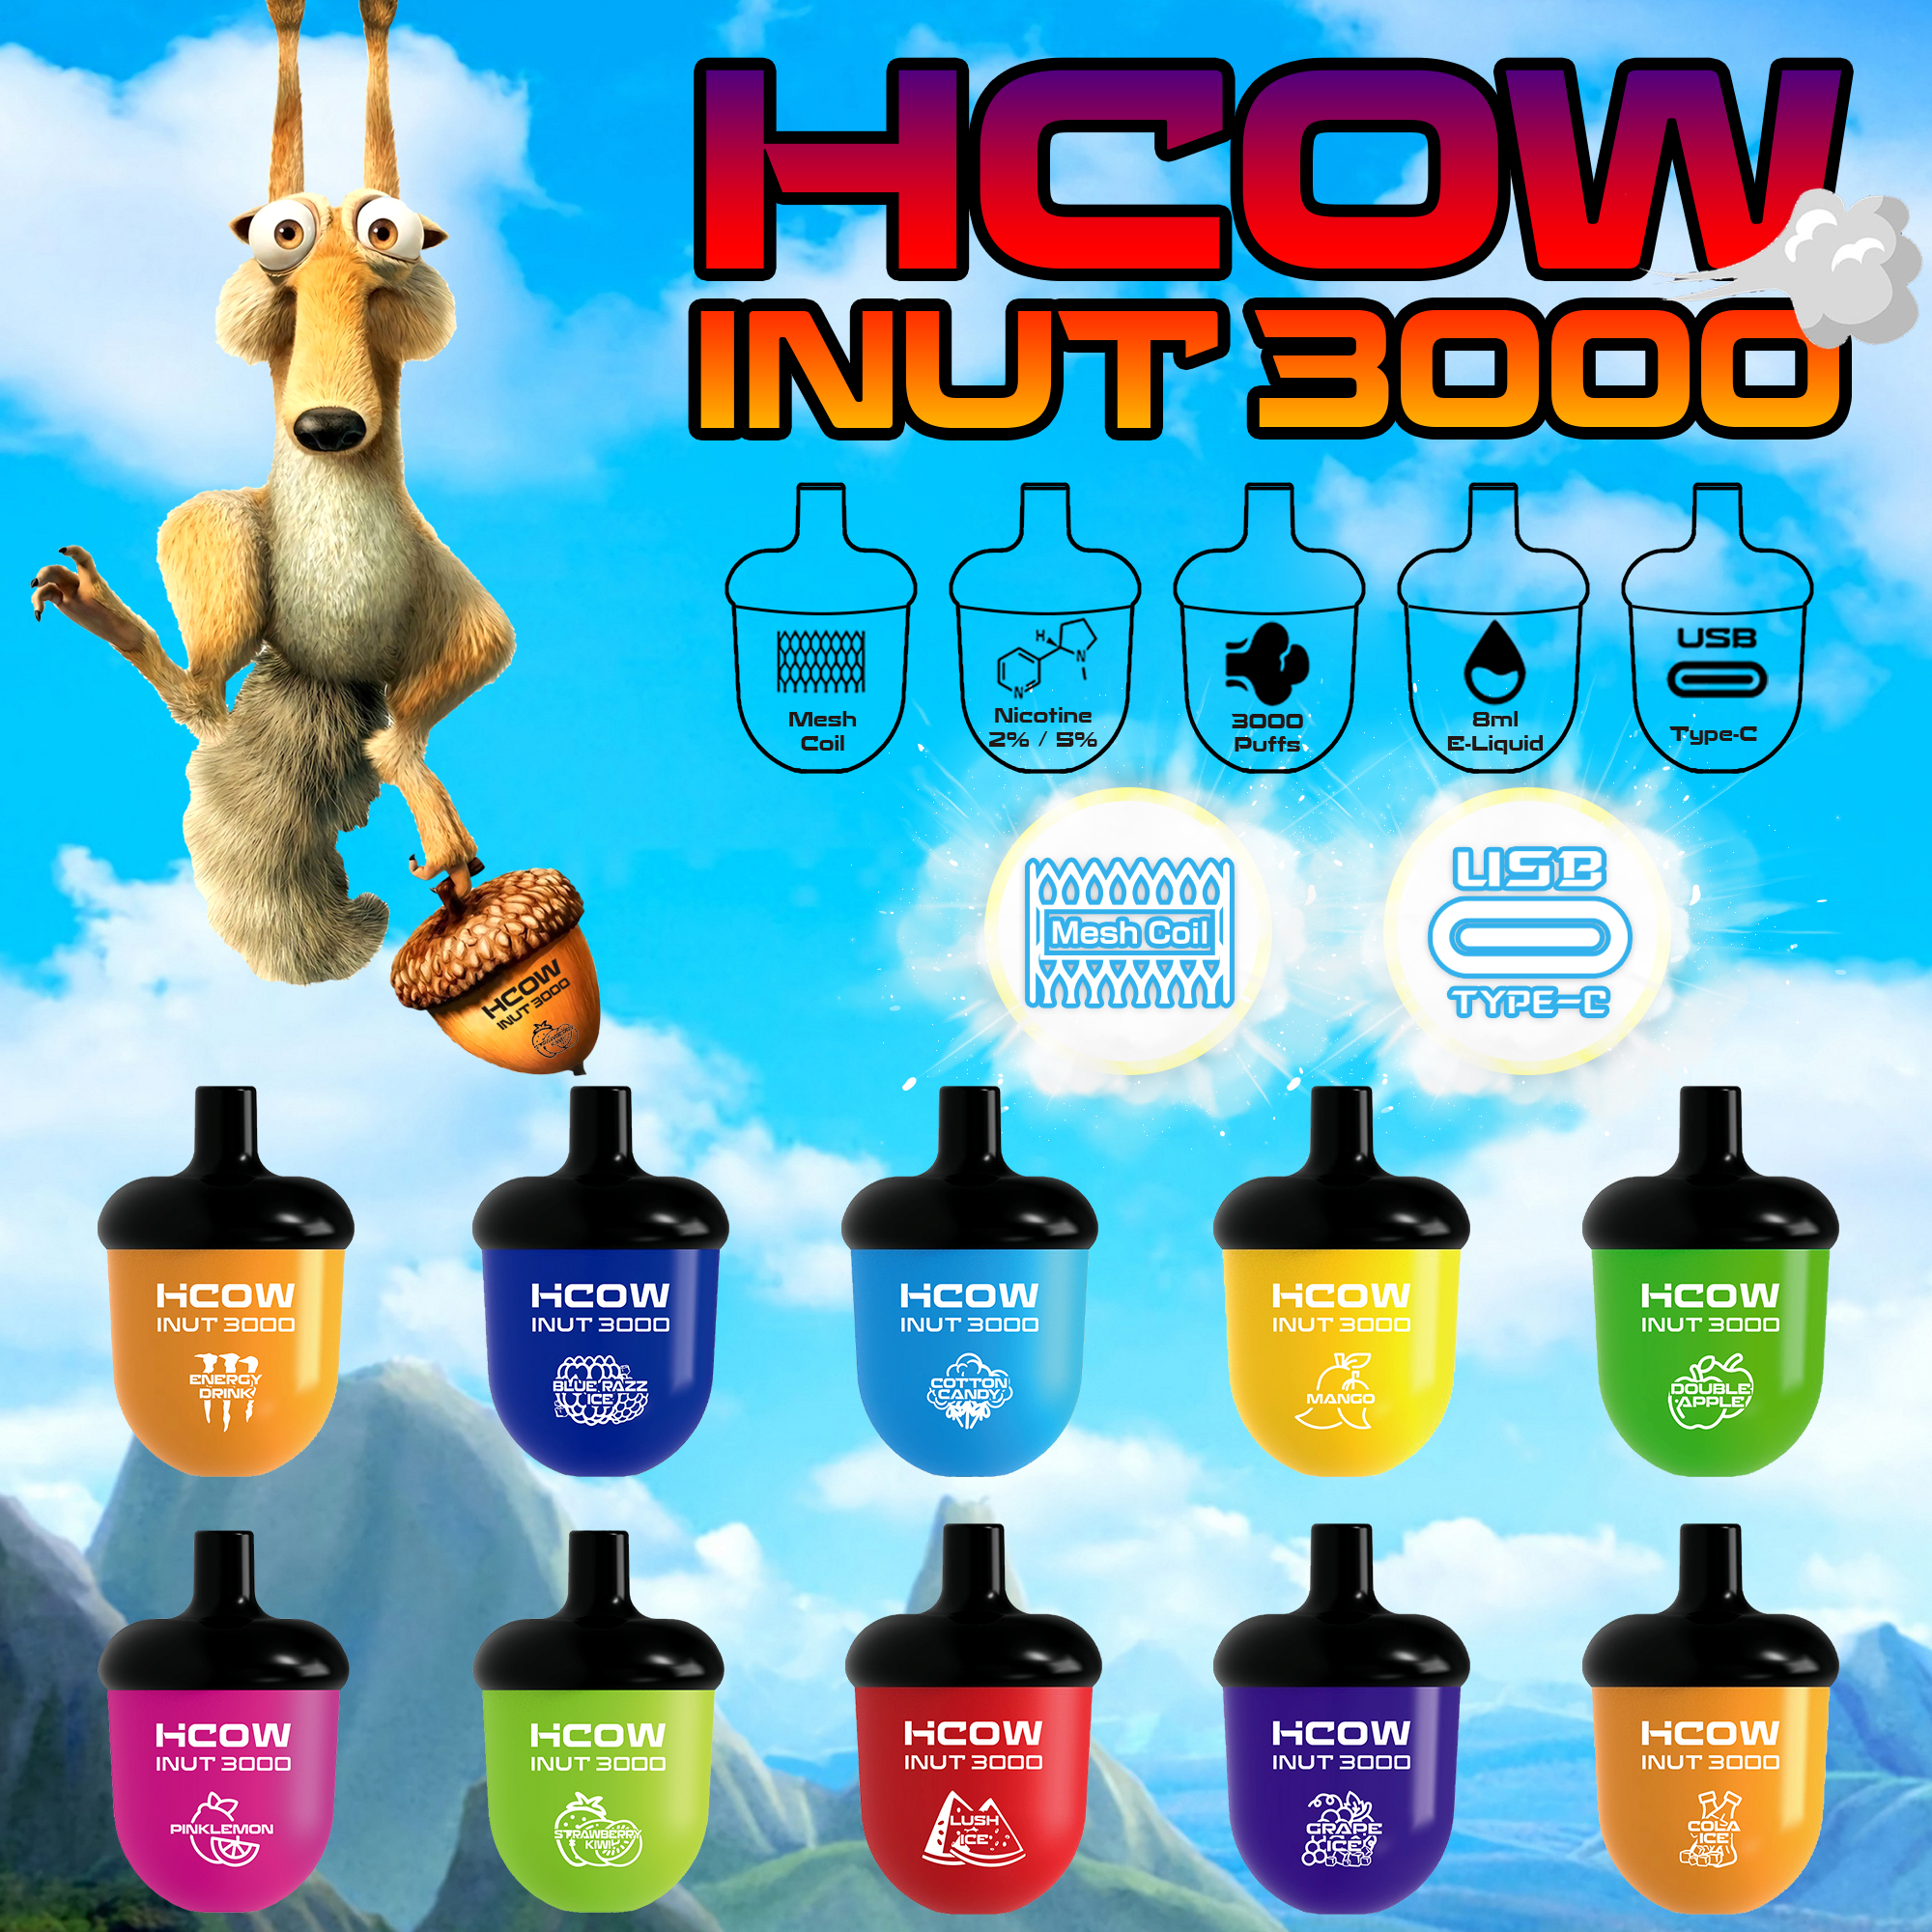 HCOW iNut 3000 Disposable Kit